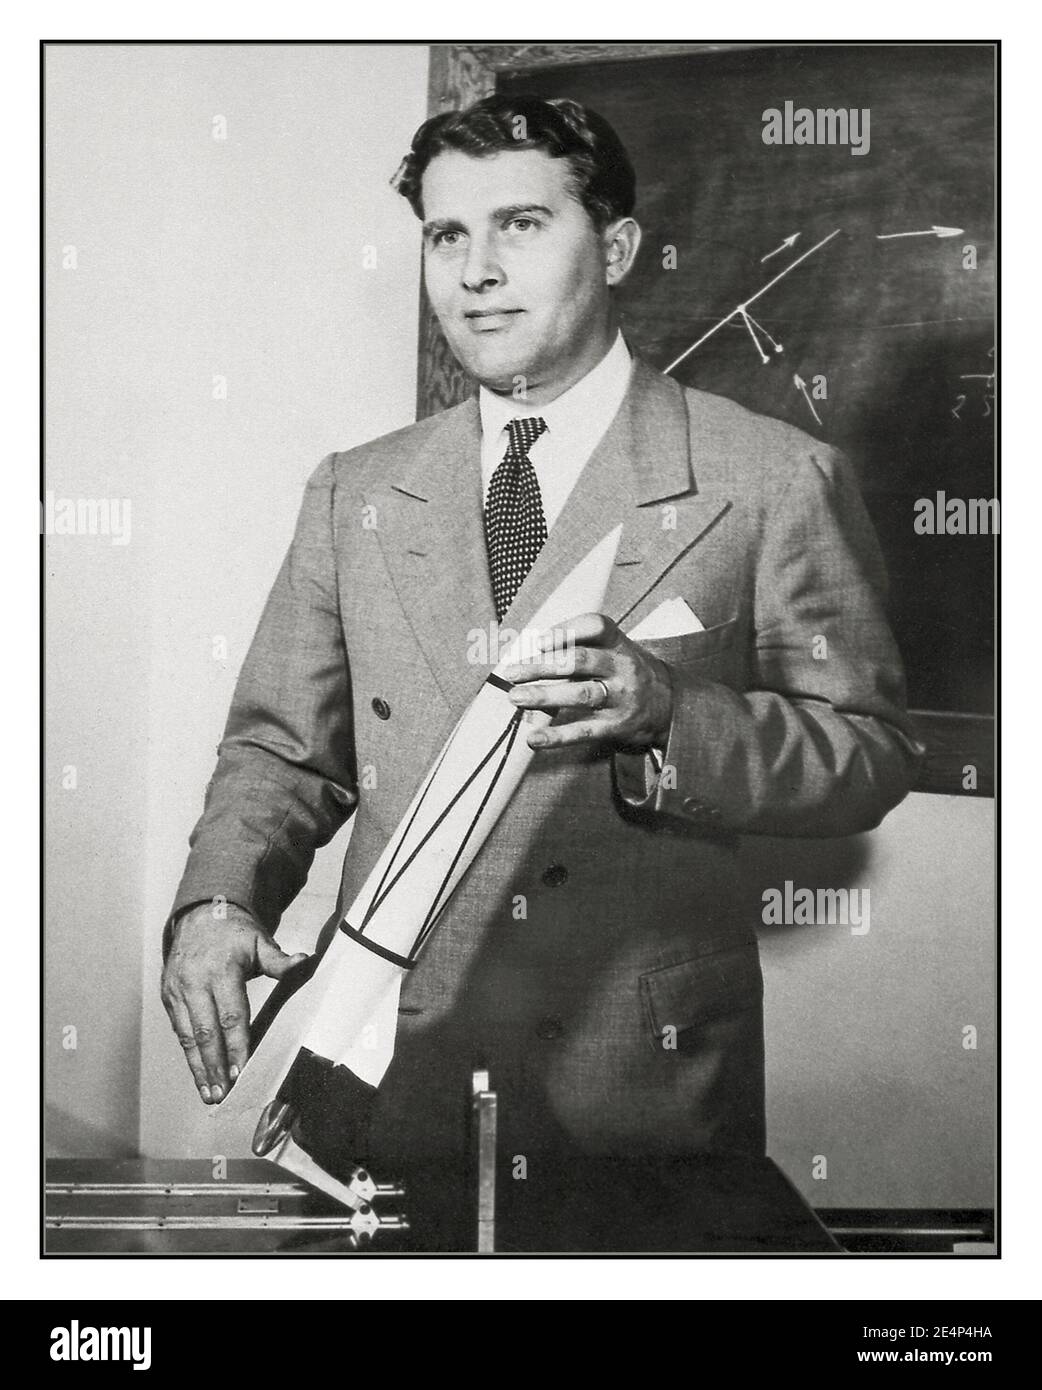 Von Braun High Resolution Stock Photography and Images - Alamy